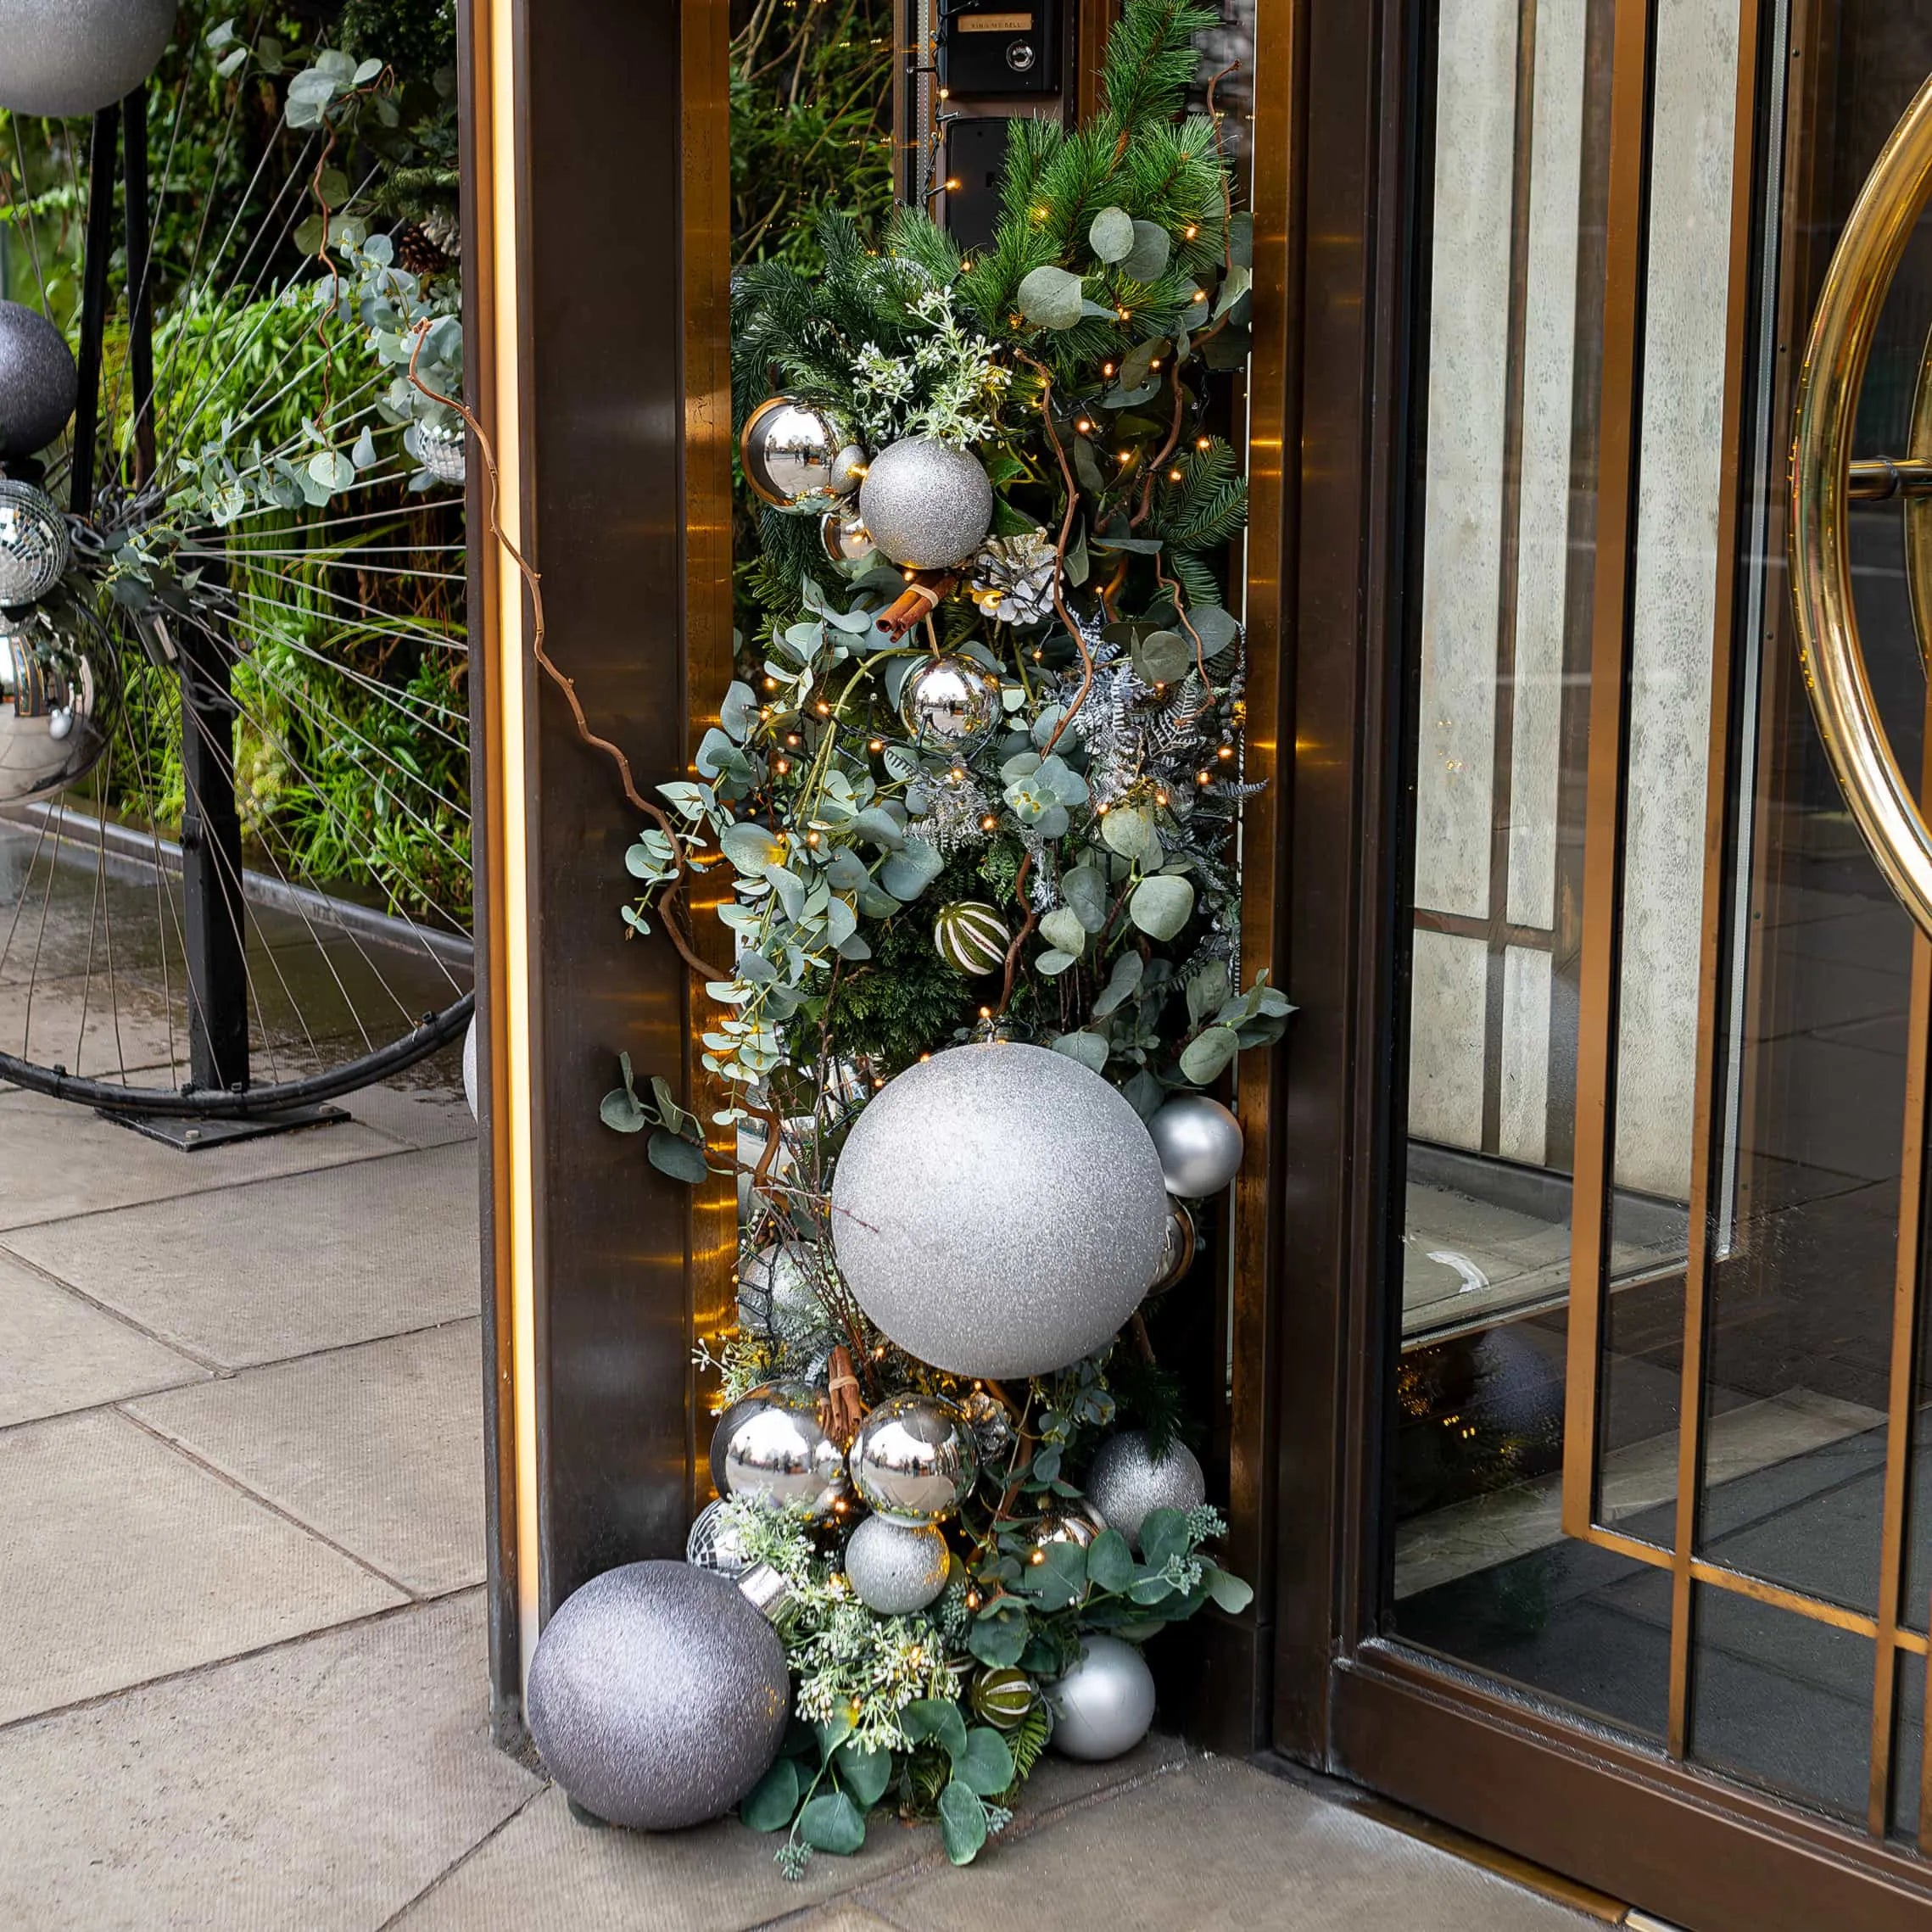 A detailed view of 'The Athenaeum', 5 star hotel in London, entrance adorned with a bespoke festive floral installation designed and installed by event florist Amaranté London. This bespoke floral arrangement showcases a cascade of large silver baubles nestled among eucalyptus leaves and pine foliage, with fairy lights woven throughout to create a captivating and luxurious welcome during the Christmas Holidays.